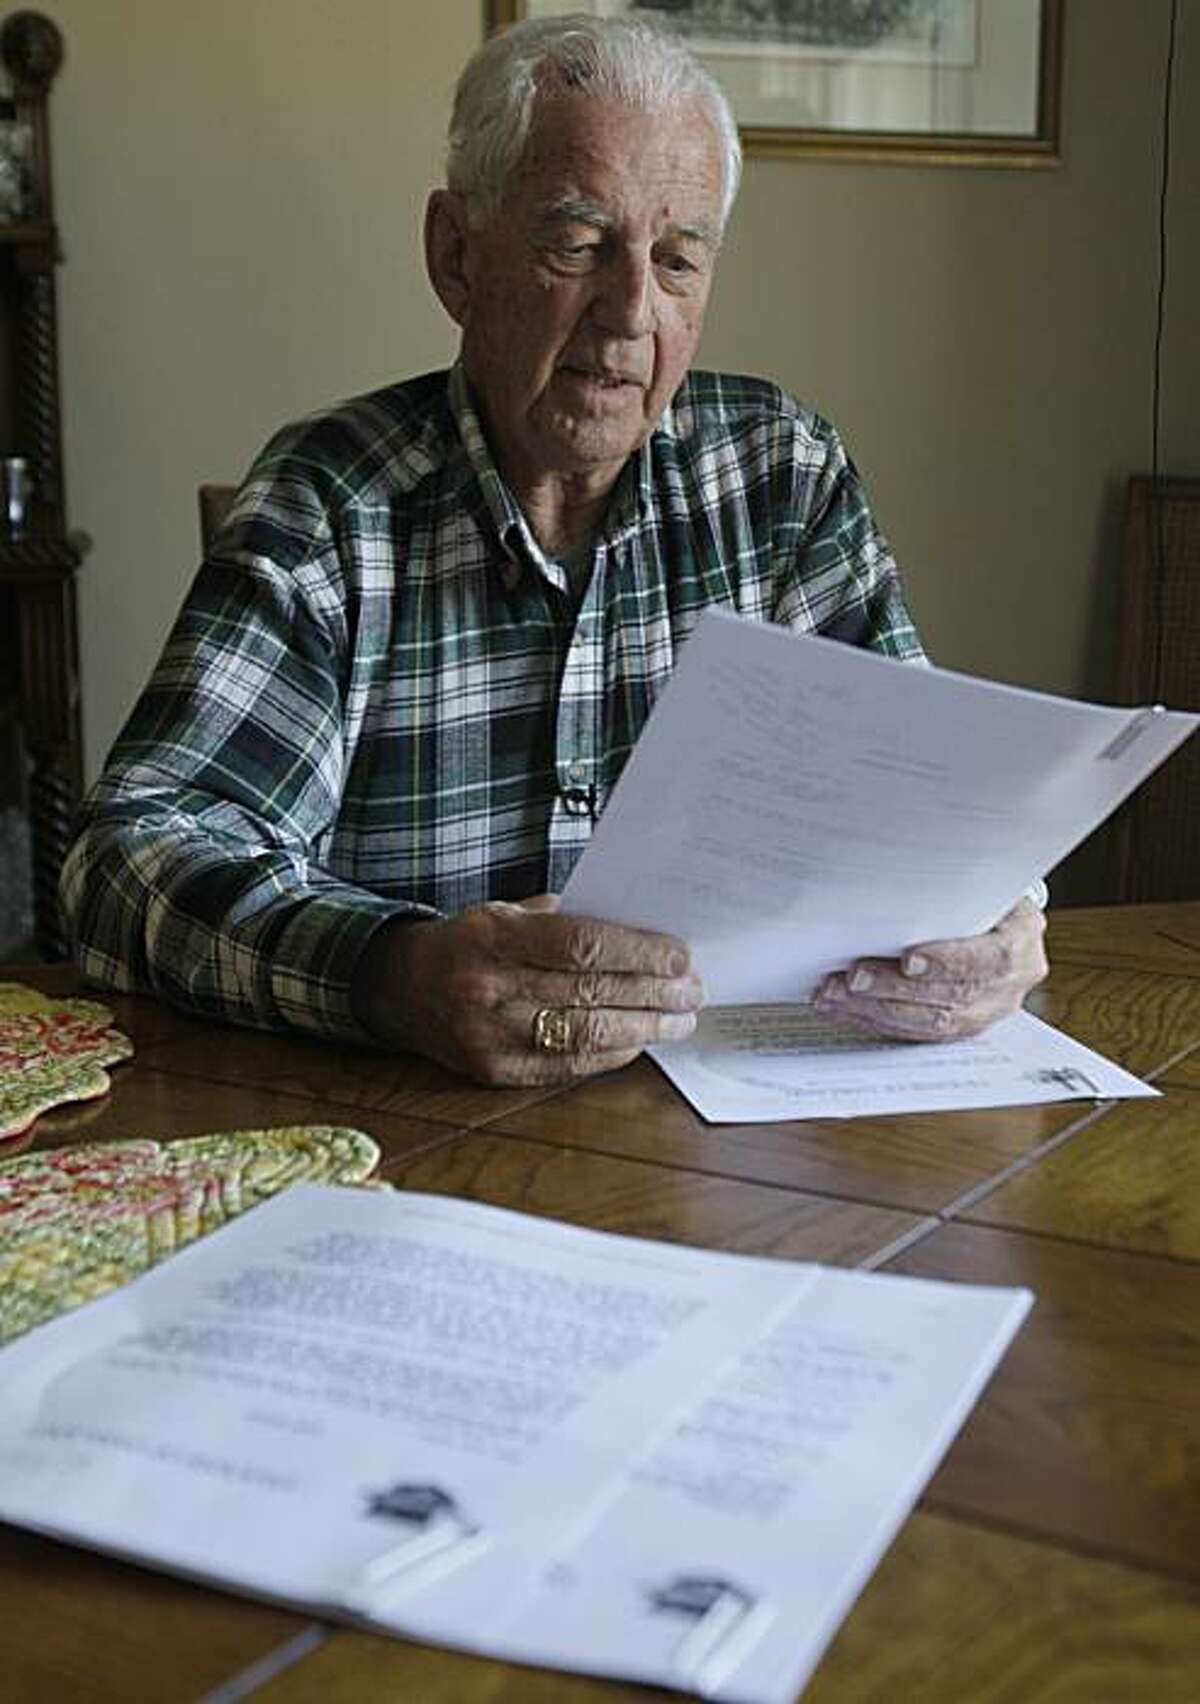 John S. Cummins, former bishop of the diocese of Oakland, Calif., recalls correspondence from Cardinal Joseph Ratzinger regarding troubled priest Stephen Kiesle as he looks over copies of a document brought by the Associated Press to his home in Oakland,Calif. on Friday, April 9, 2010. A letter obtained by the AP and bearing the signature of future Pope Benedict XVI shows then-Cardinal Joseph Ratzinger resisted defrocking Kiesle, who had a record of sexually molesting children, after his case had languished for four years at the Vatican. The 1985 letter was typed in Latin and is part of years of correspondence between the Diocese of Oakland and the Vatican about the proposed defrocking of Rev. Kiesle. Cummins, 82 and now retired, initially told the AP